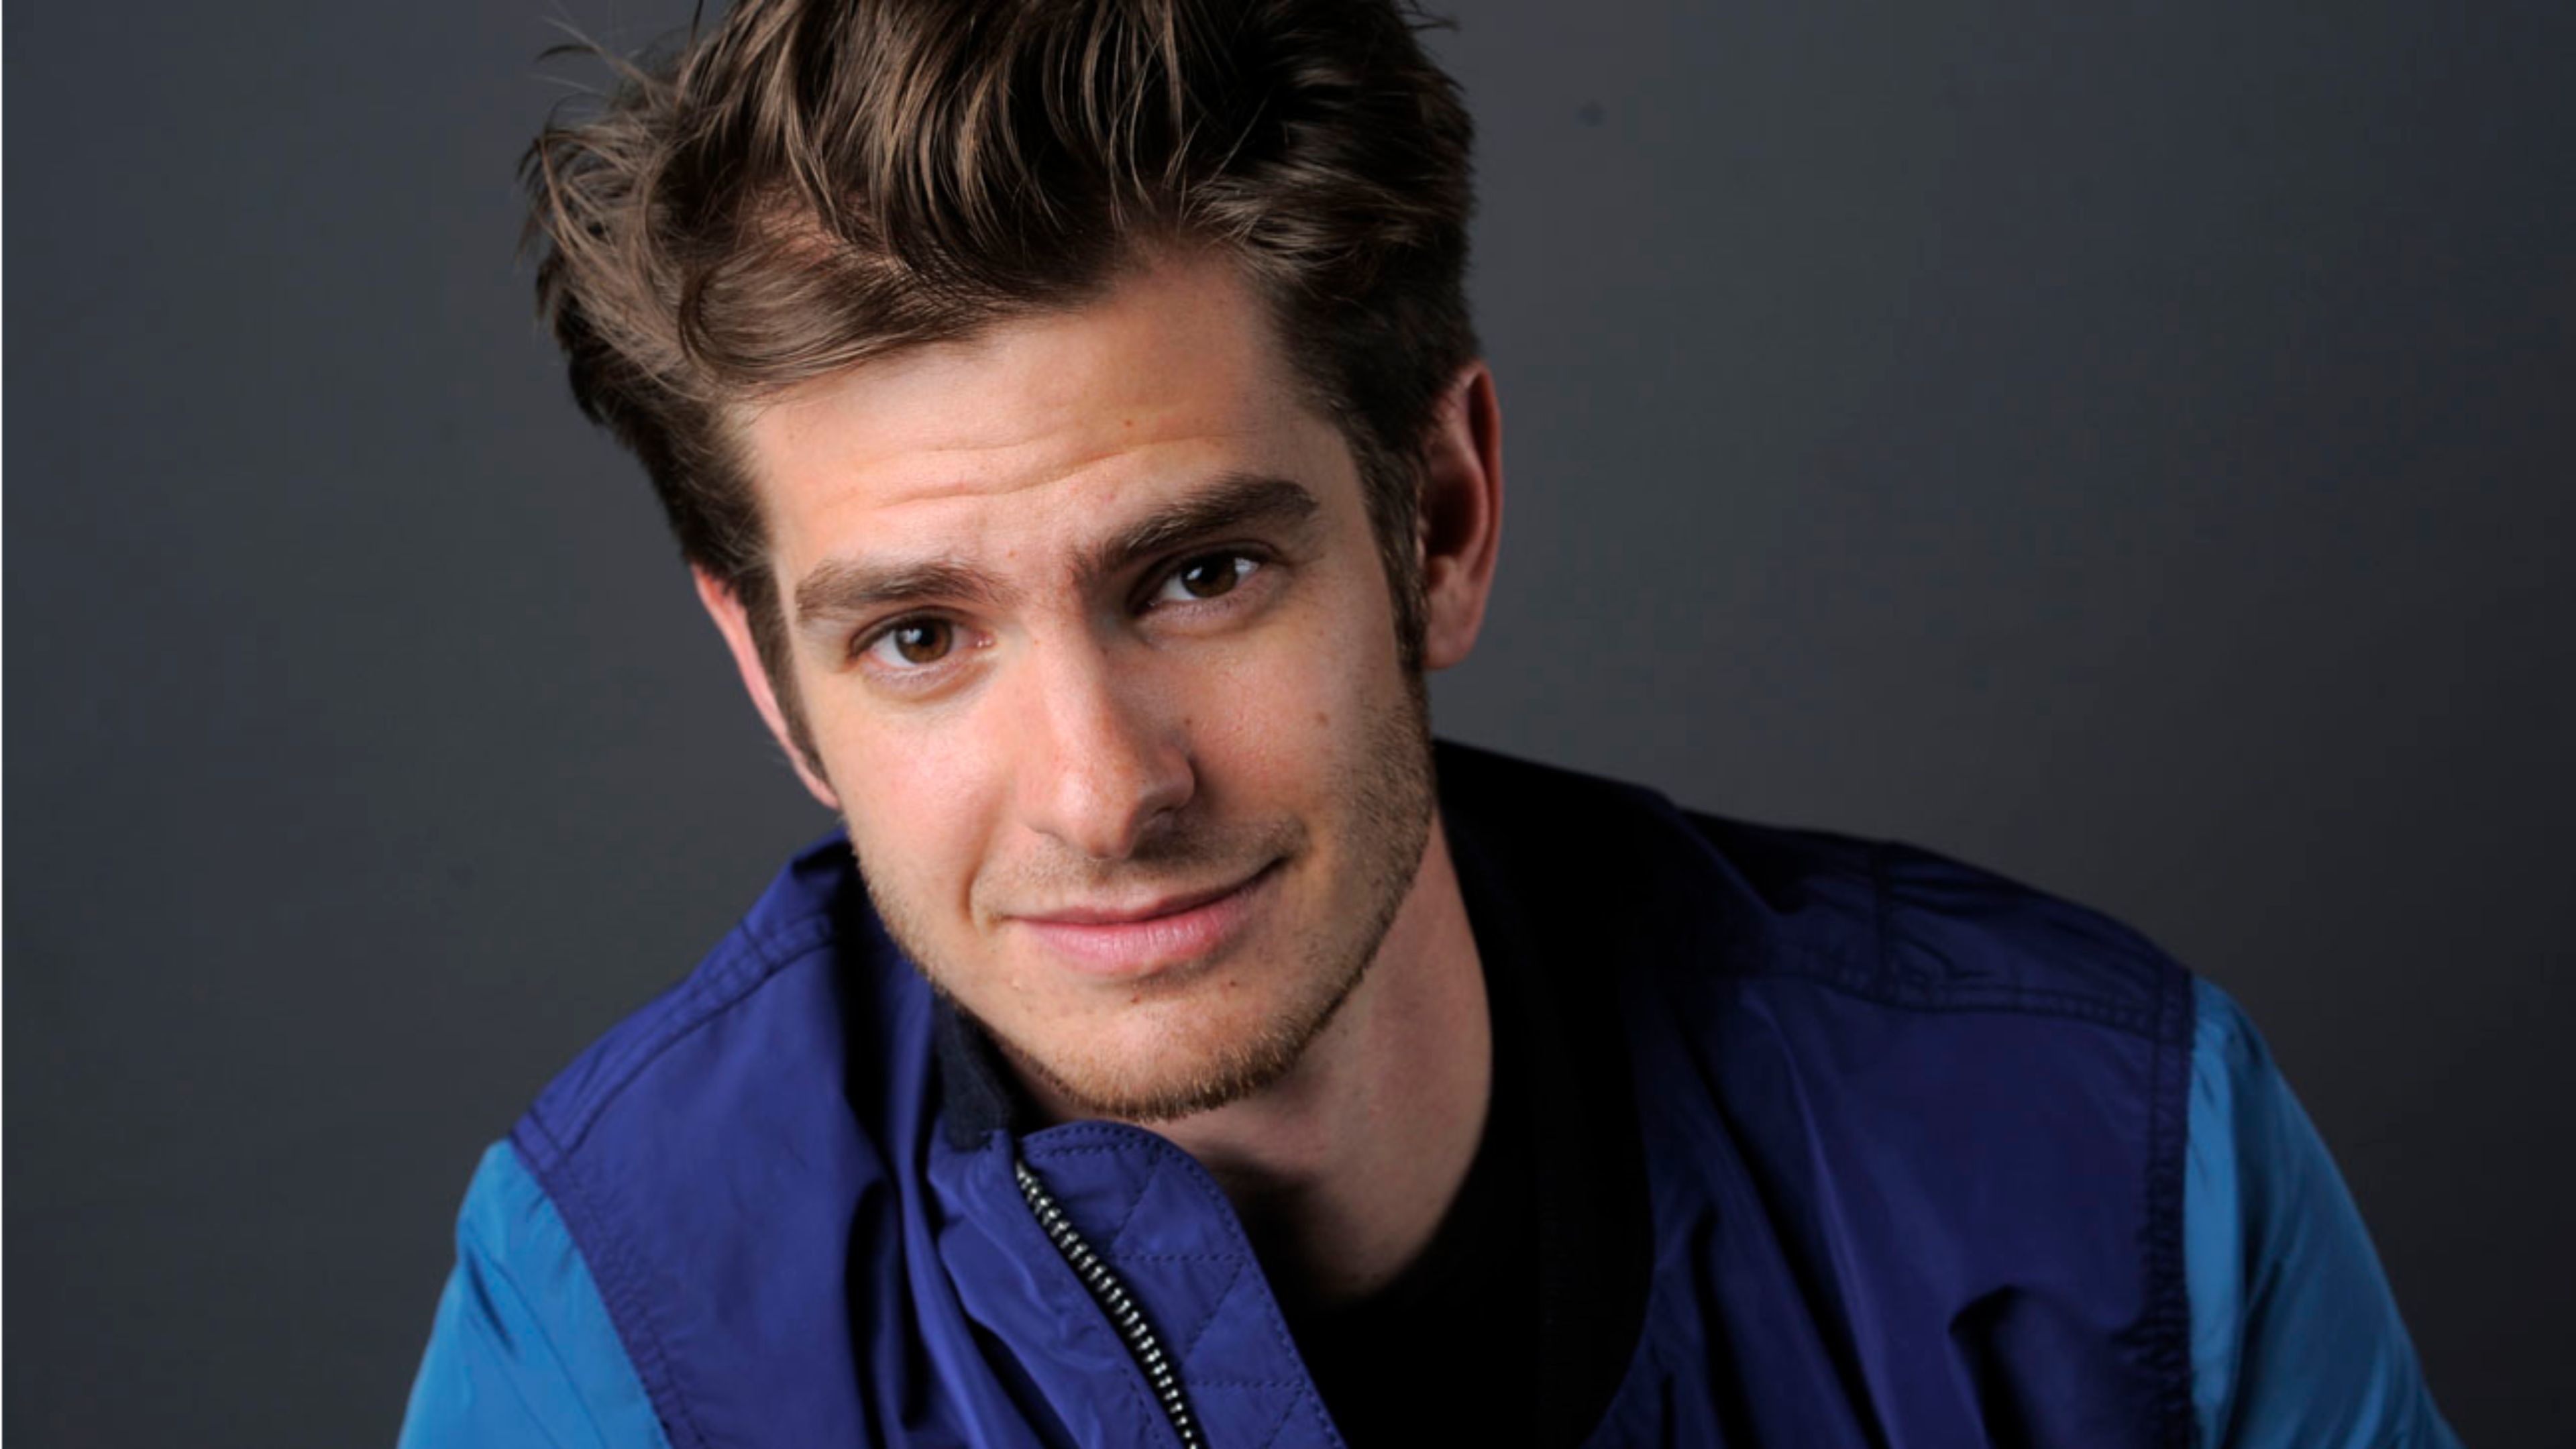 3840x2160 wallpaper.wiki-Free-Andrew-Garfield-Image-PIC-WPC001978